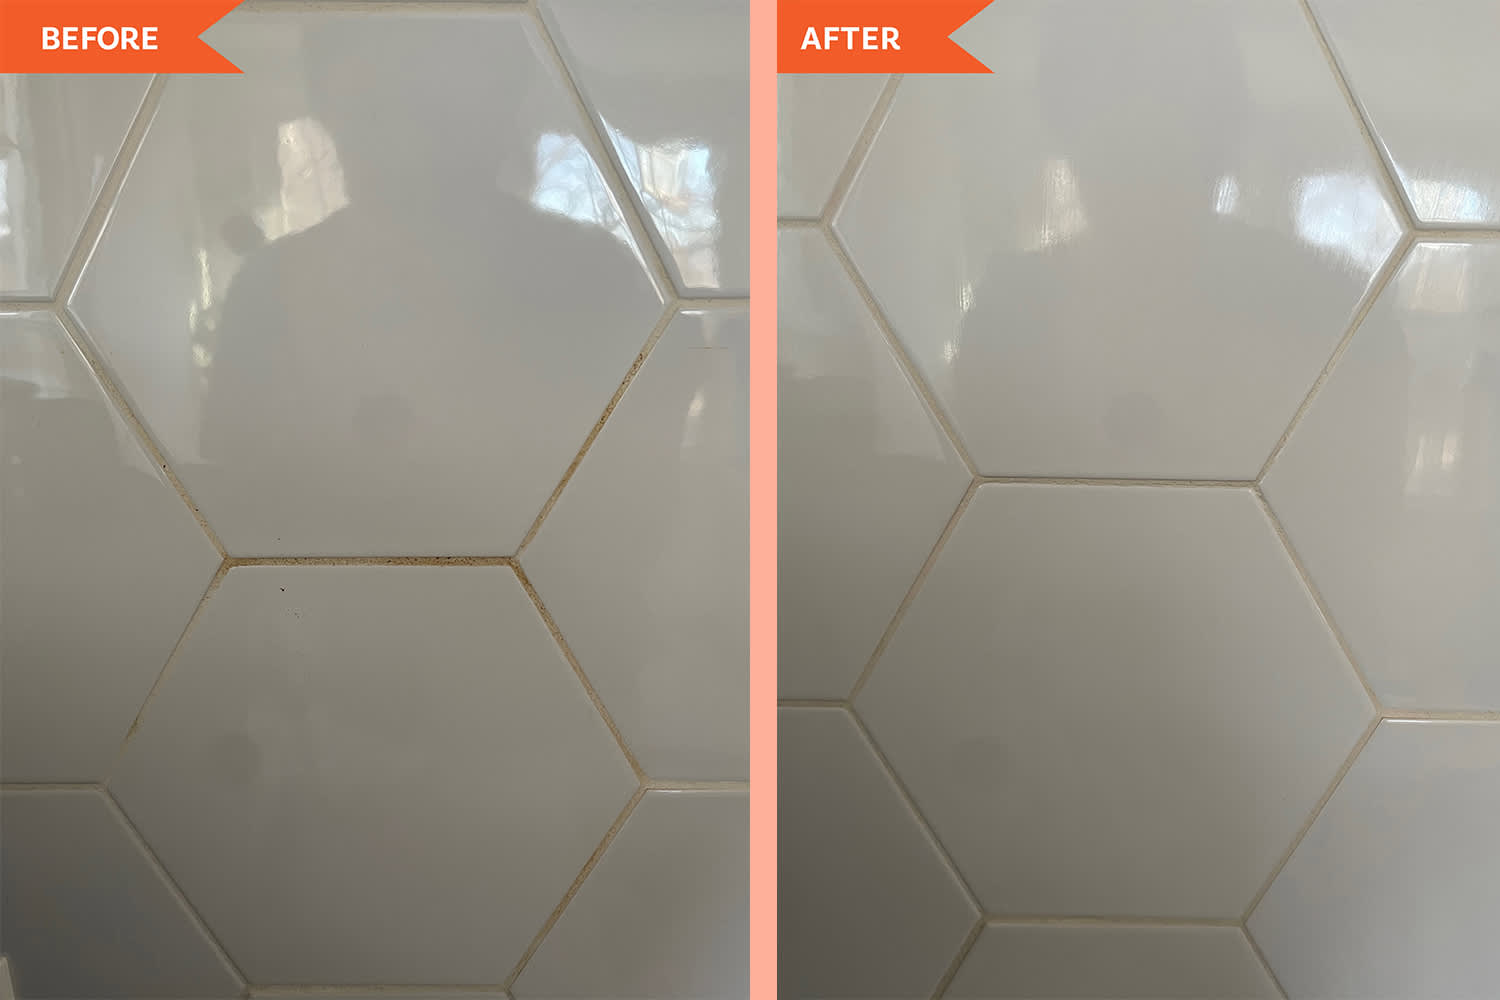 https://cdn.apartmenttherapy.info/image/upload/v1649338675/k/Edit/2022-04-Pink-Stuff-Grout-Cleaner-Review/clean-tile-diptych.jpg